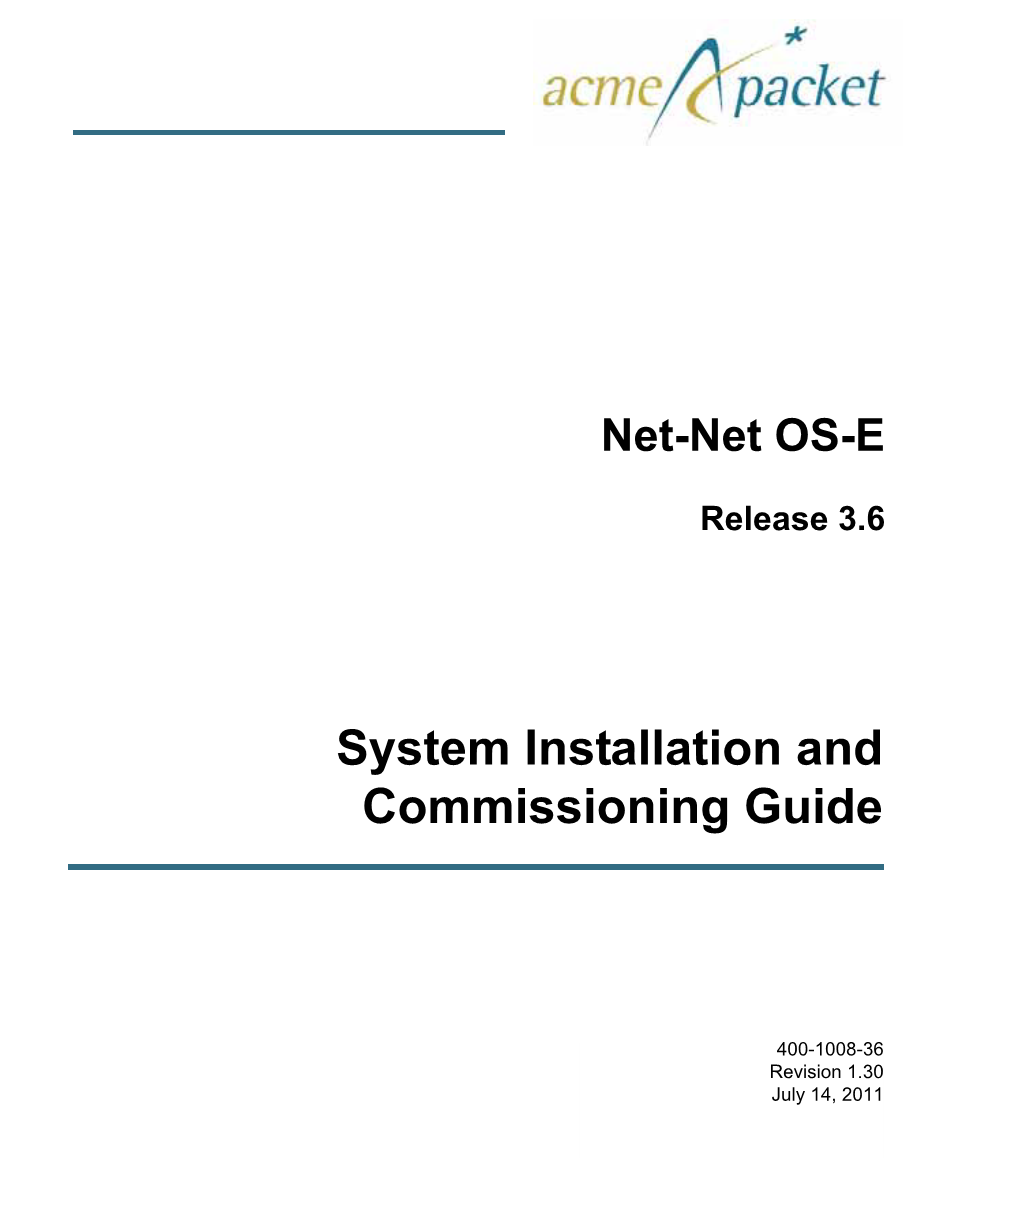 Net-Net OS-E 3.6 System Installation and Commissioning Guide